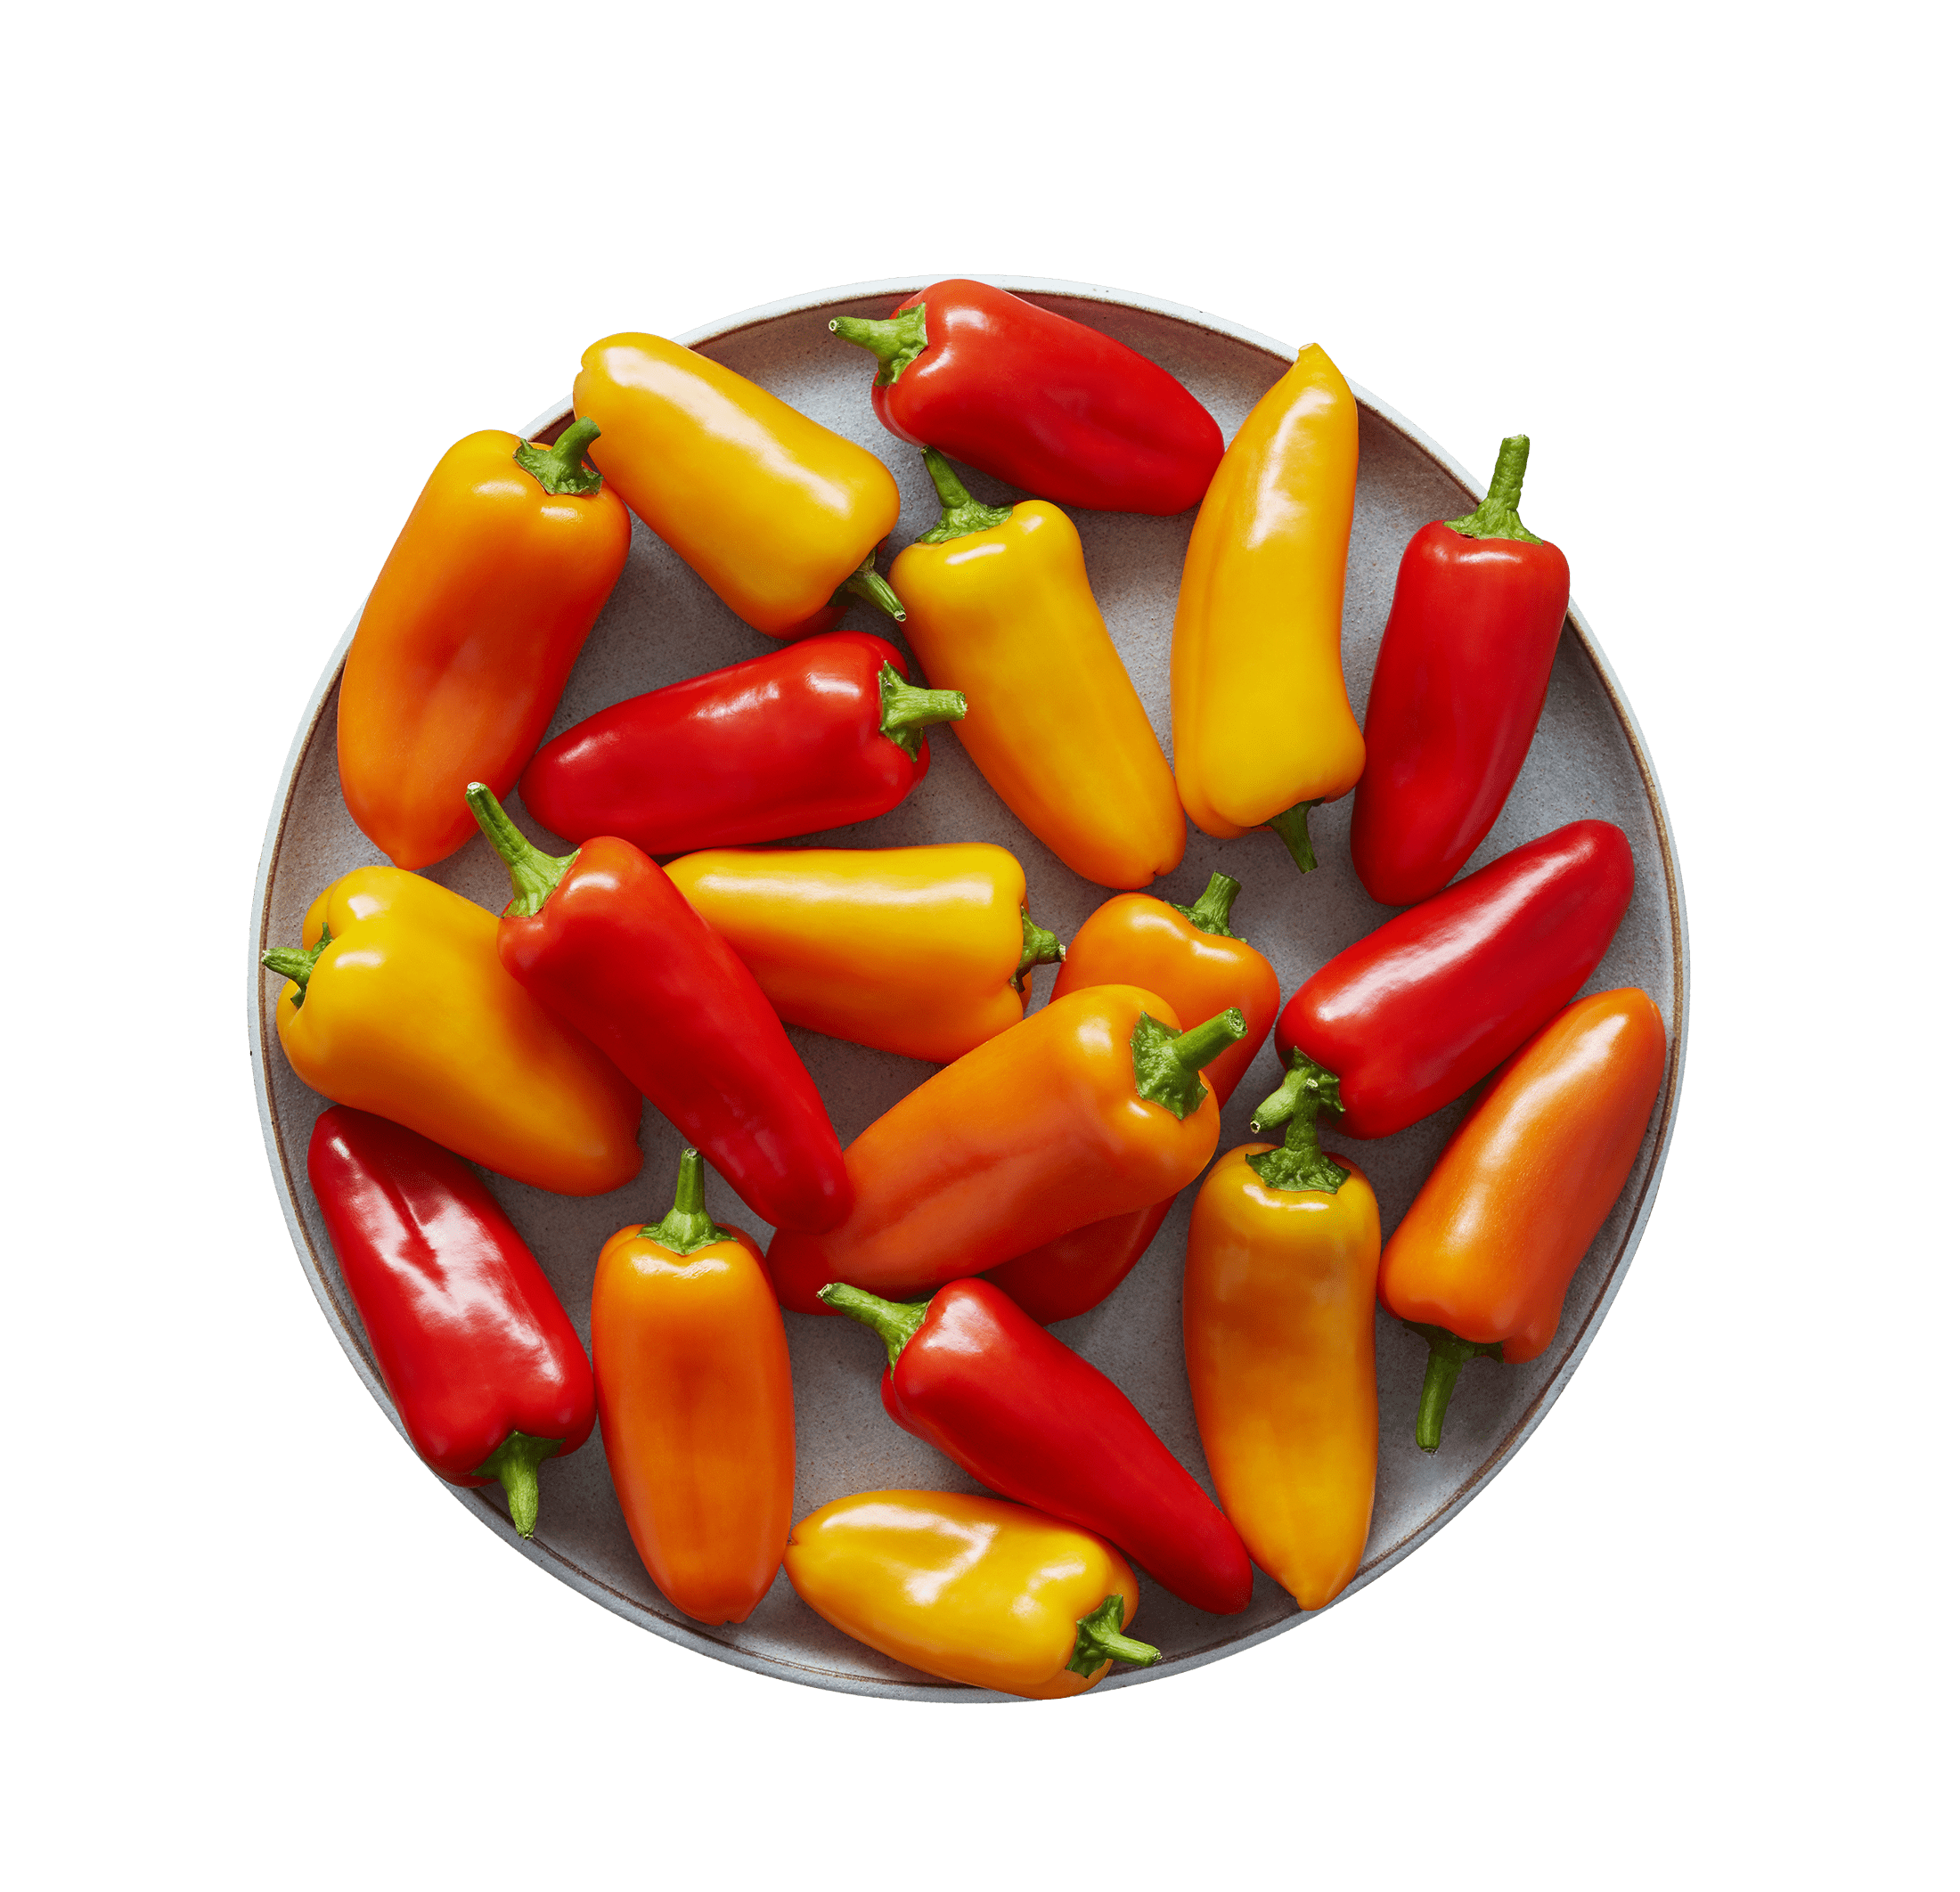 WILD Mini Peppers - SUNSET Grown. All reserved.